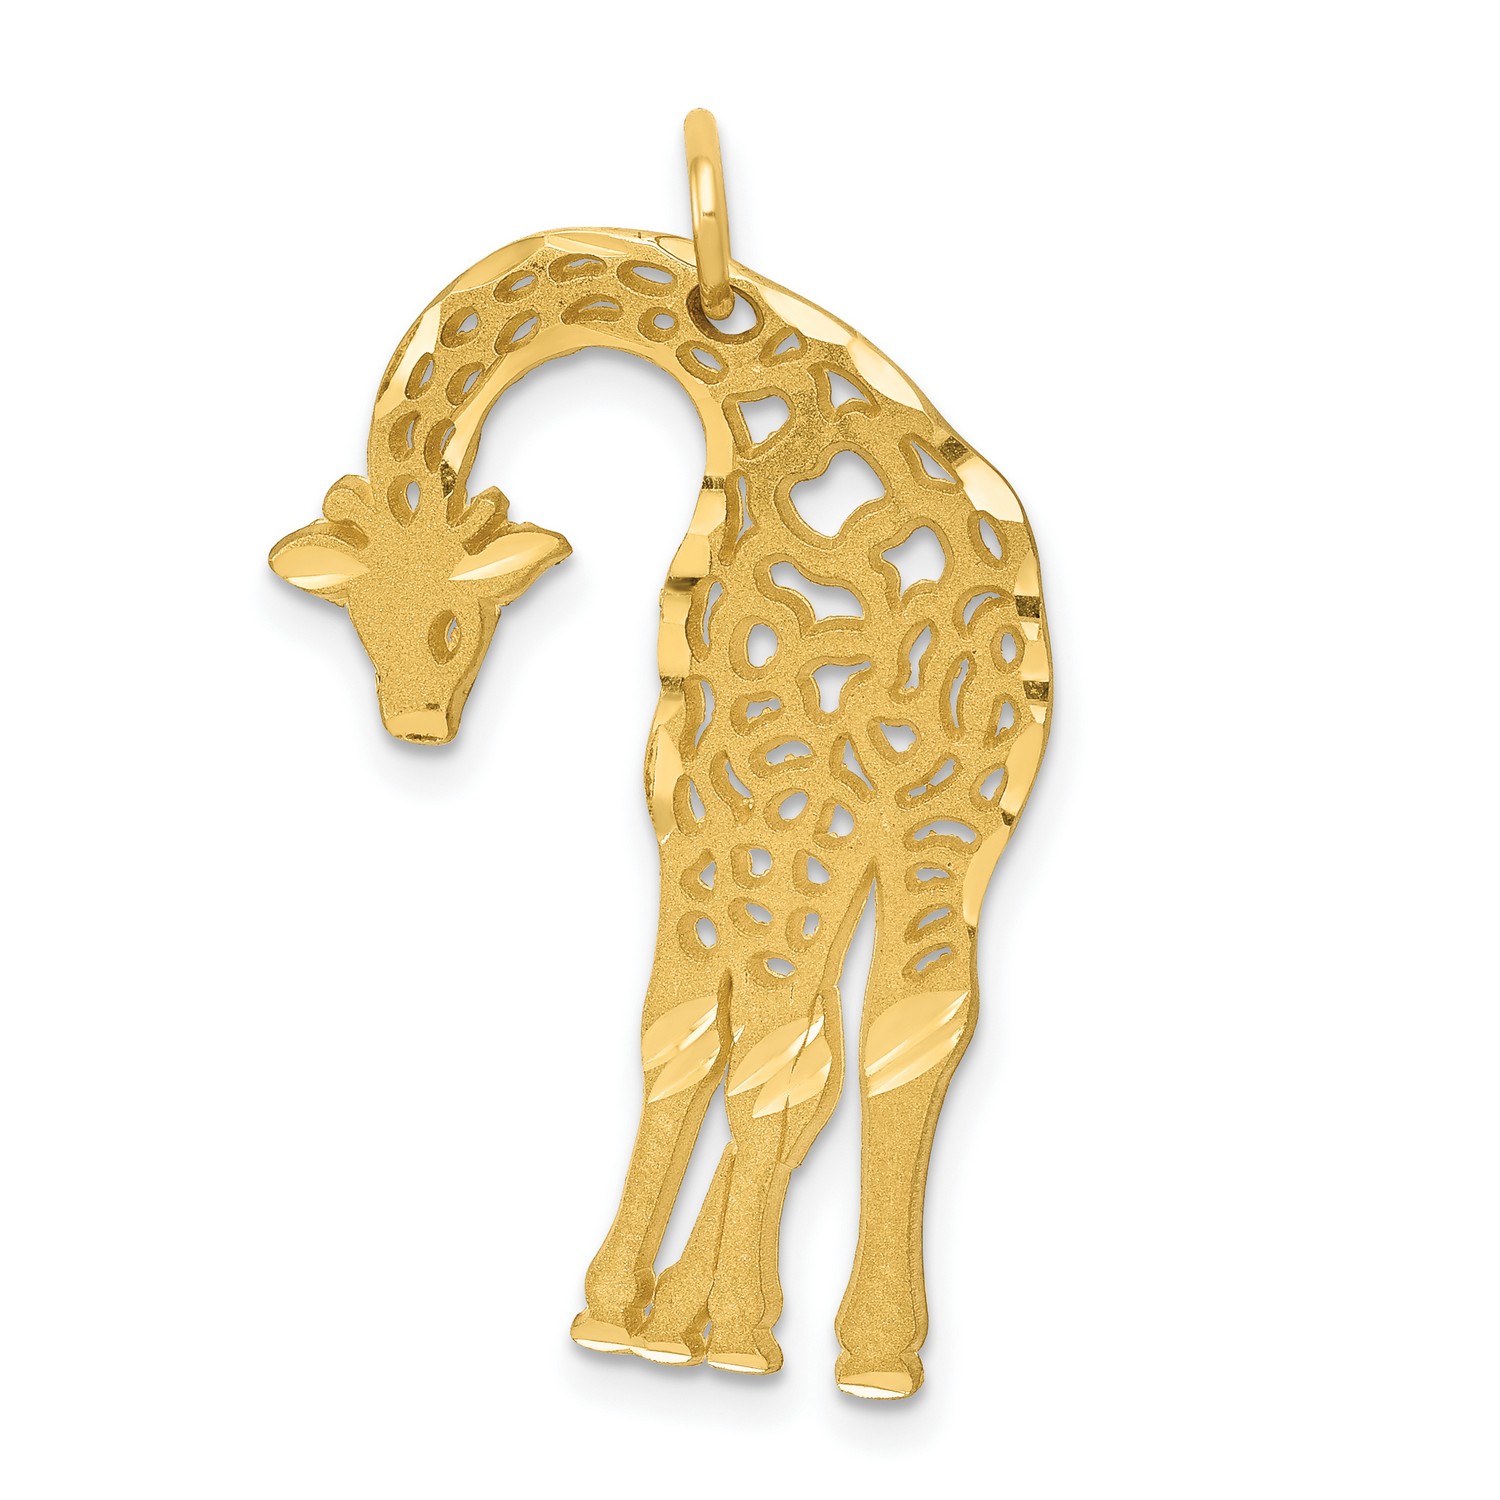 Pre-owned Jewelry Stores Network 14k Yellow Gold Open Pattern Giraffe Charm Pendant